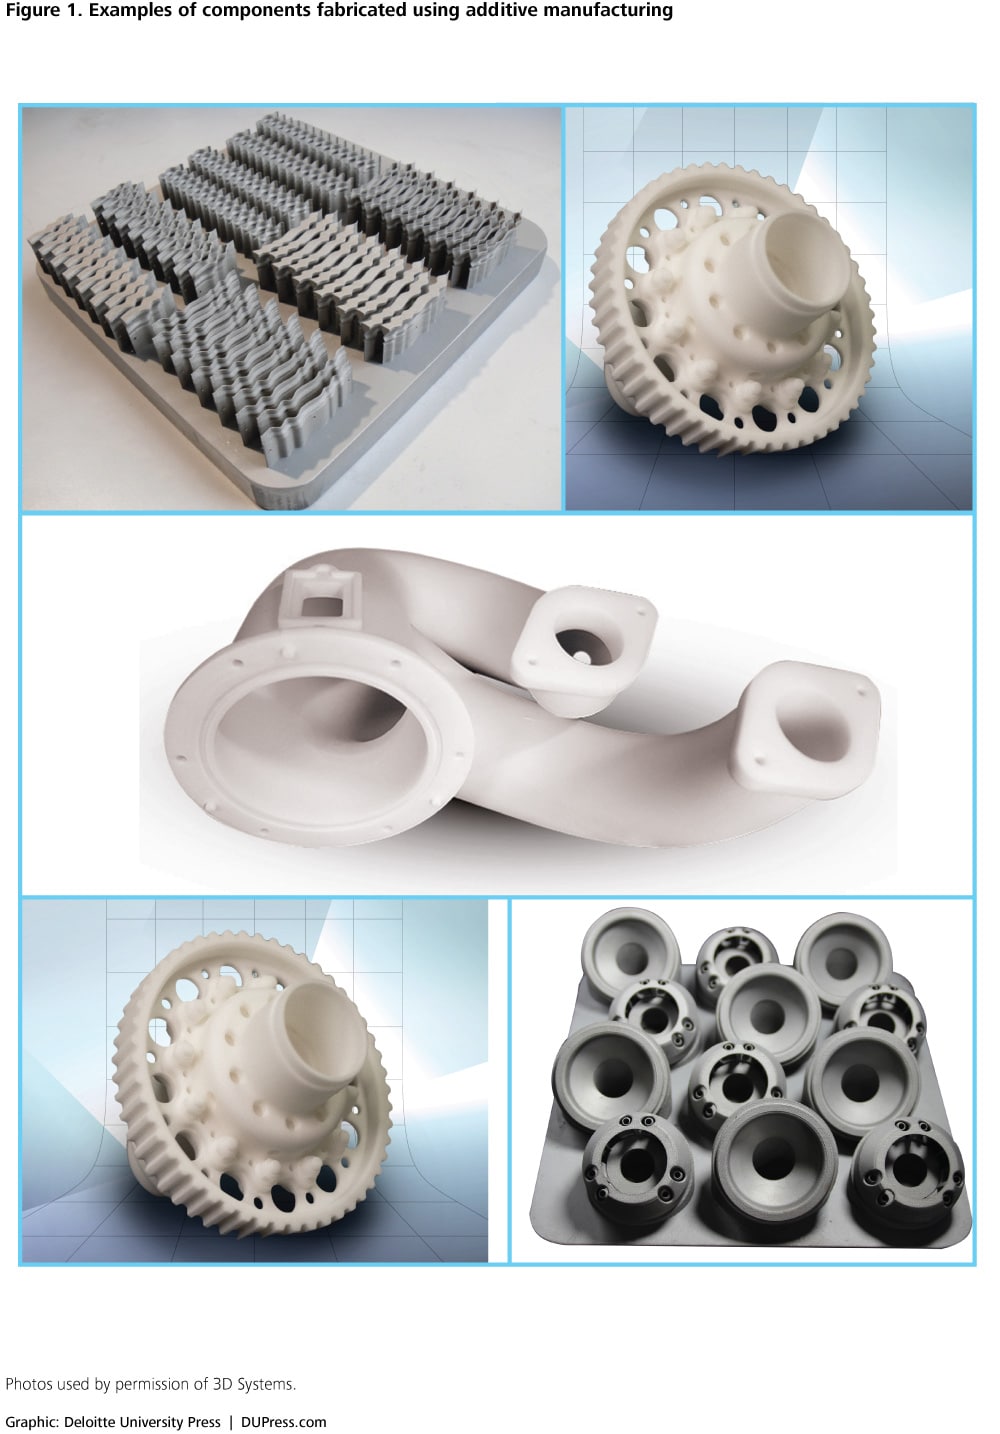 Figure 1. Examples of components fabricated using additive manufacturing